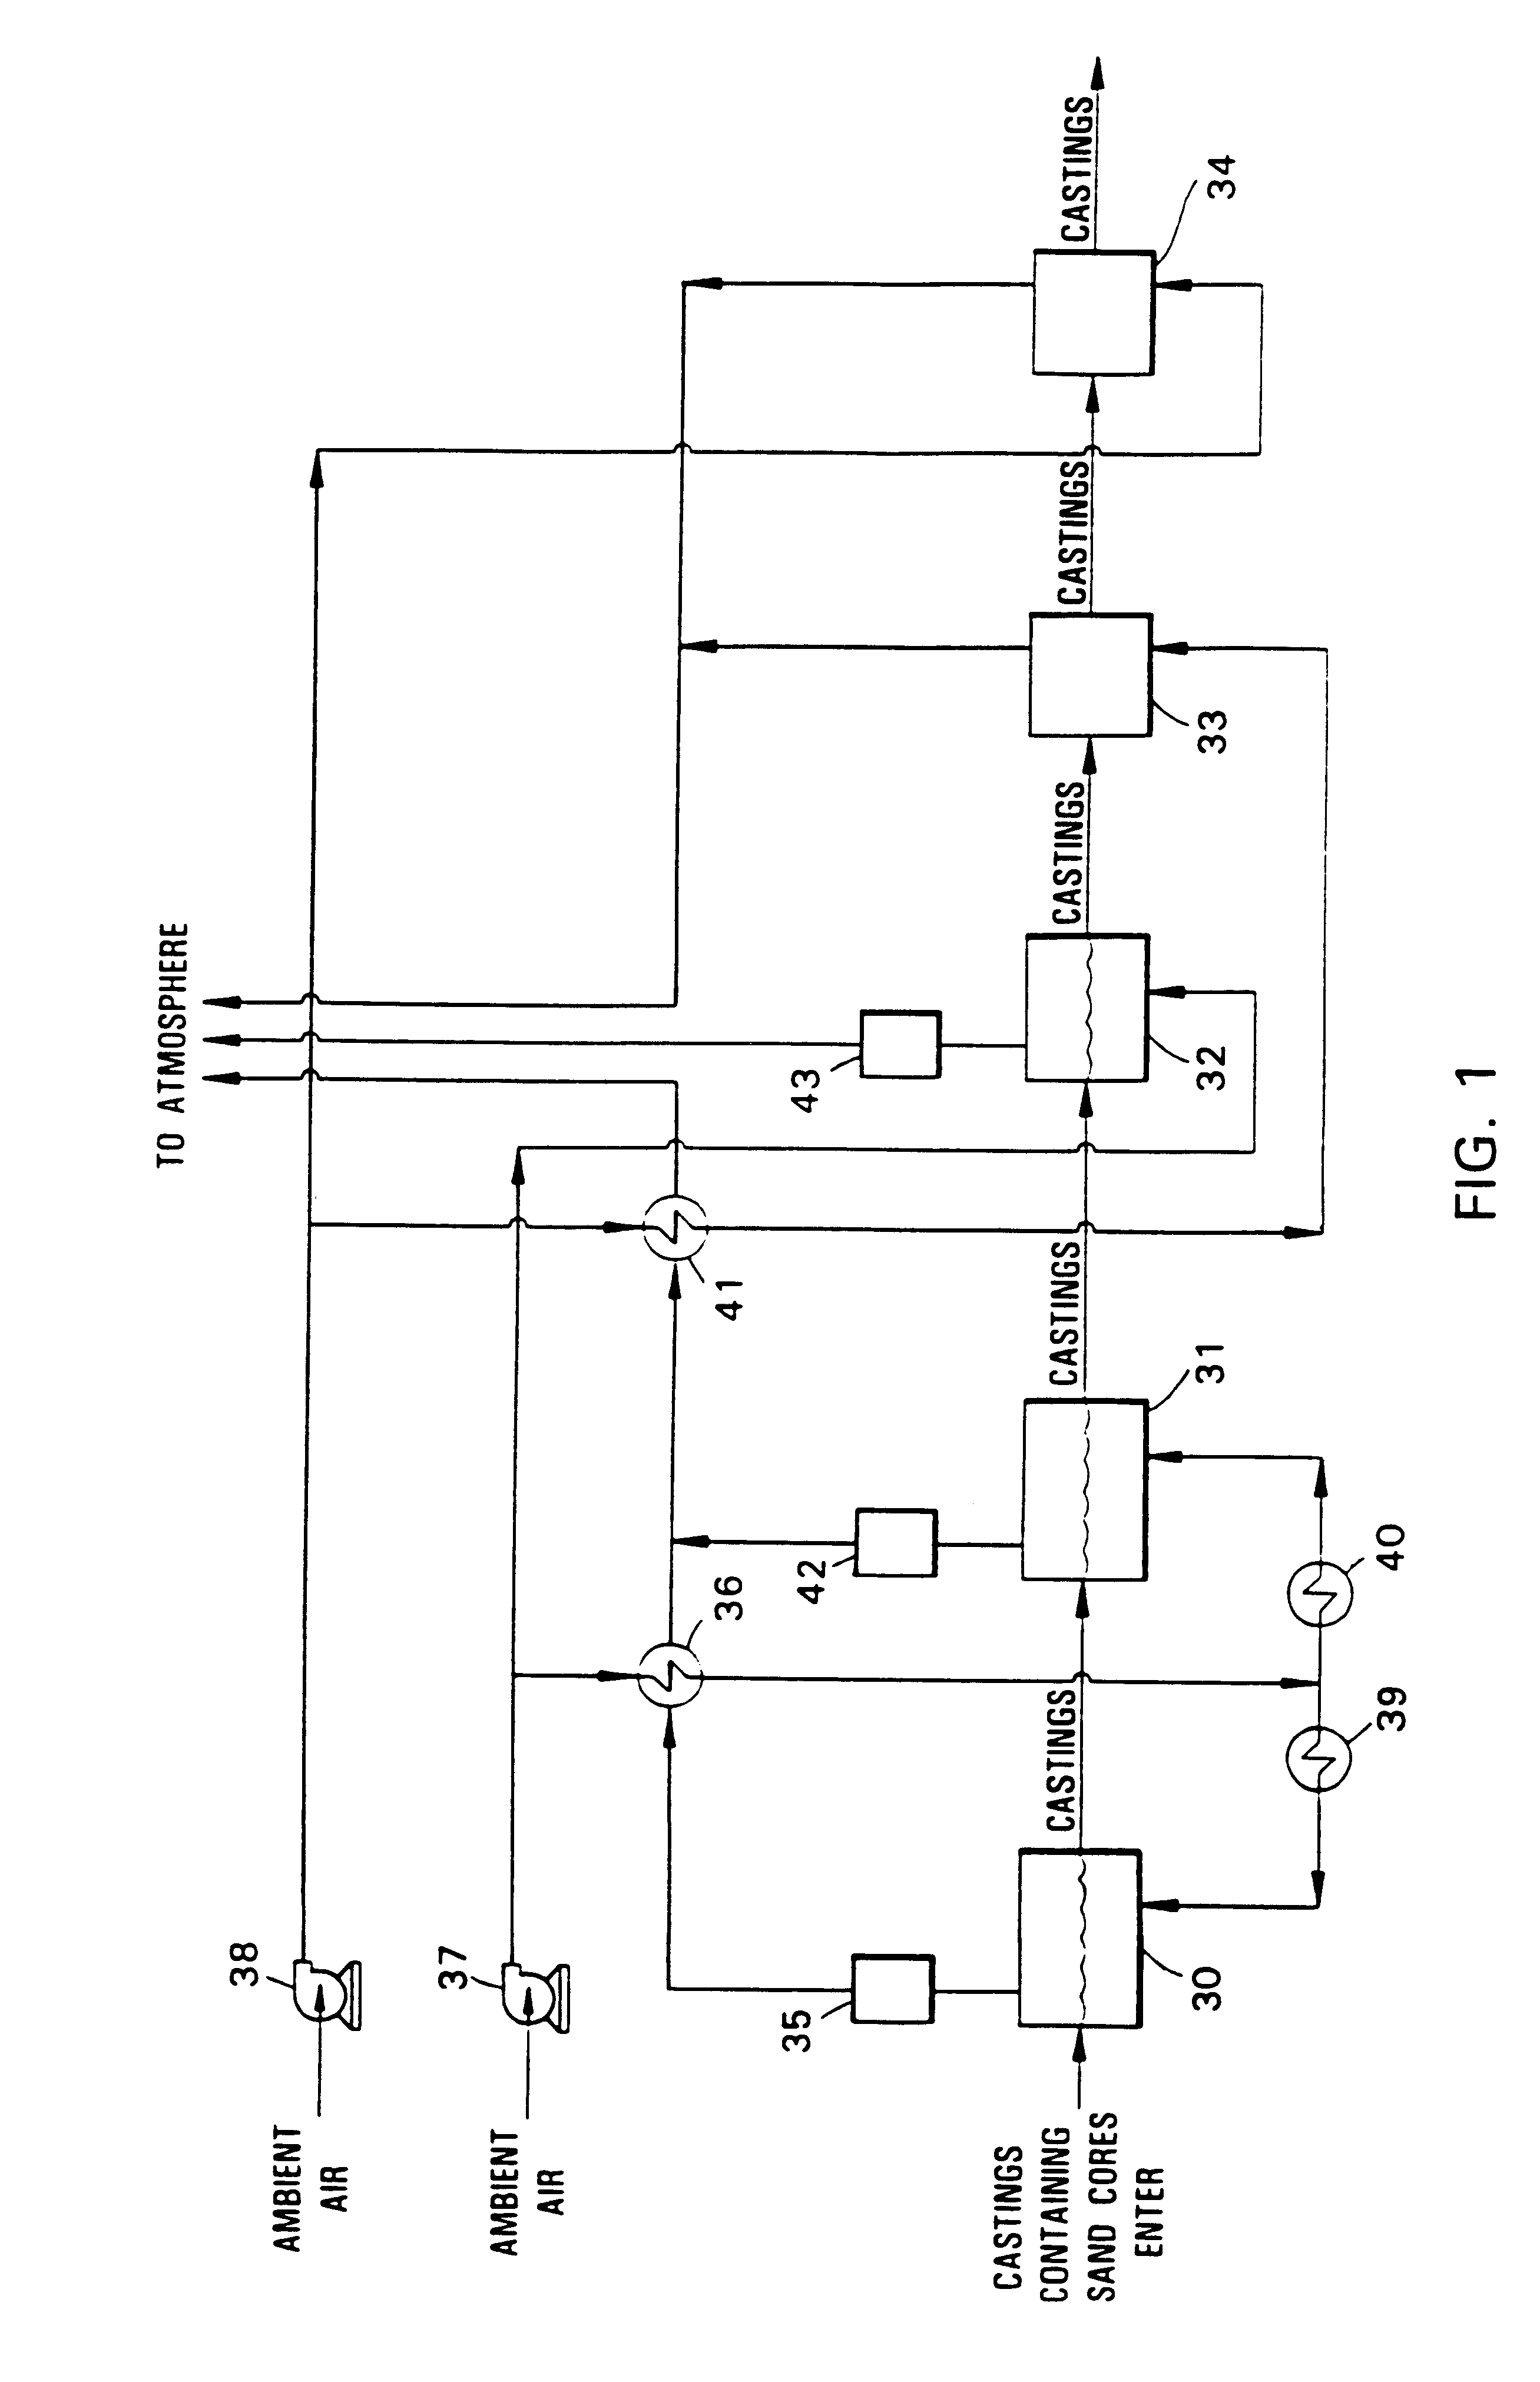 Apparatus and method for sand core debonding and heat treating metal castings